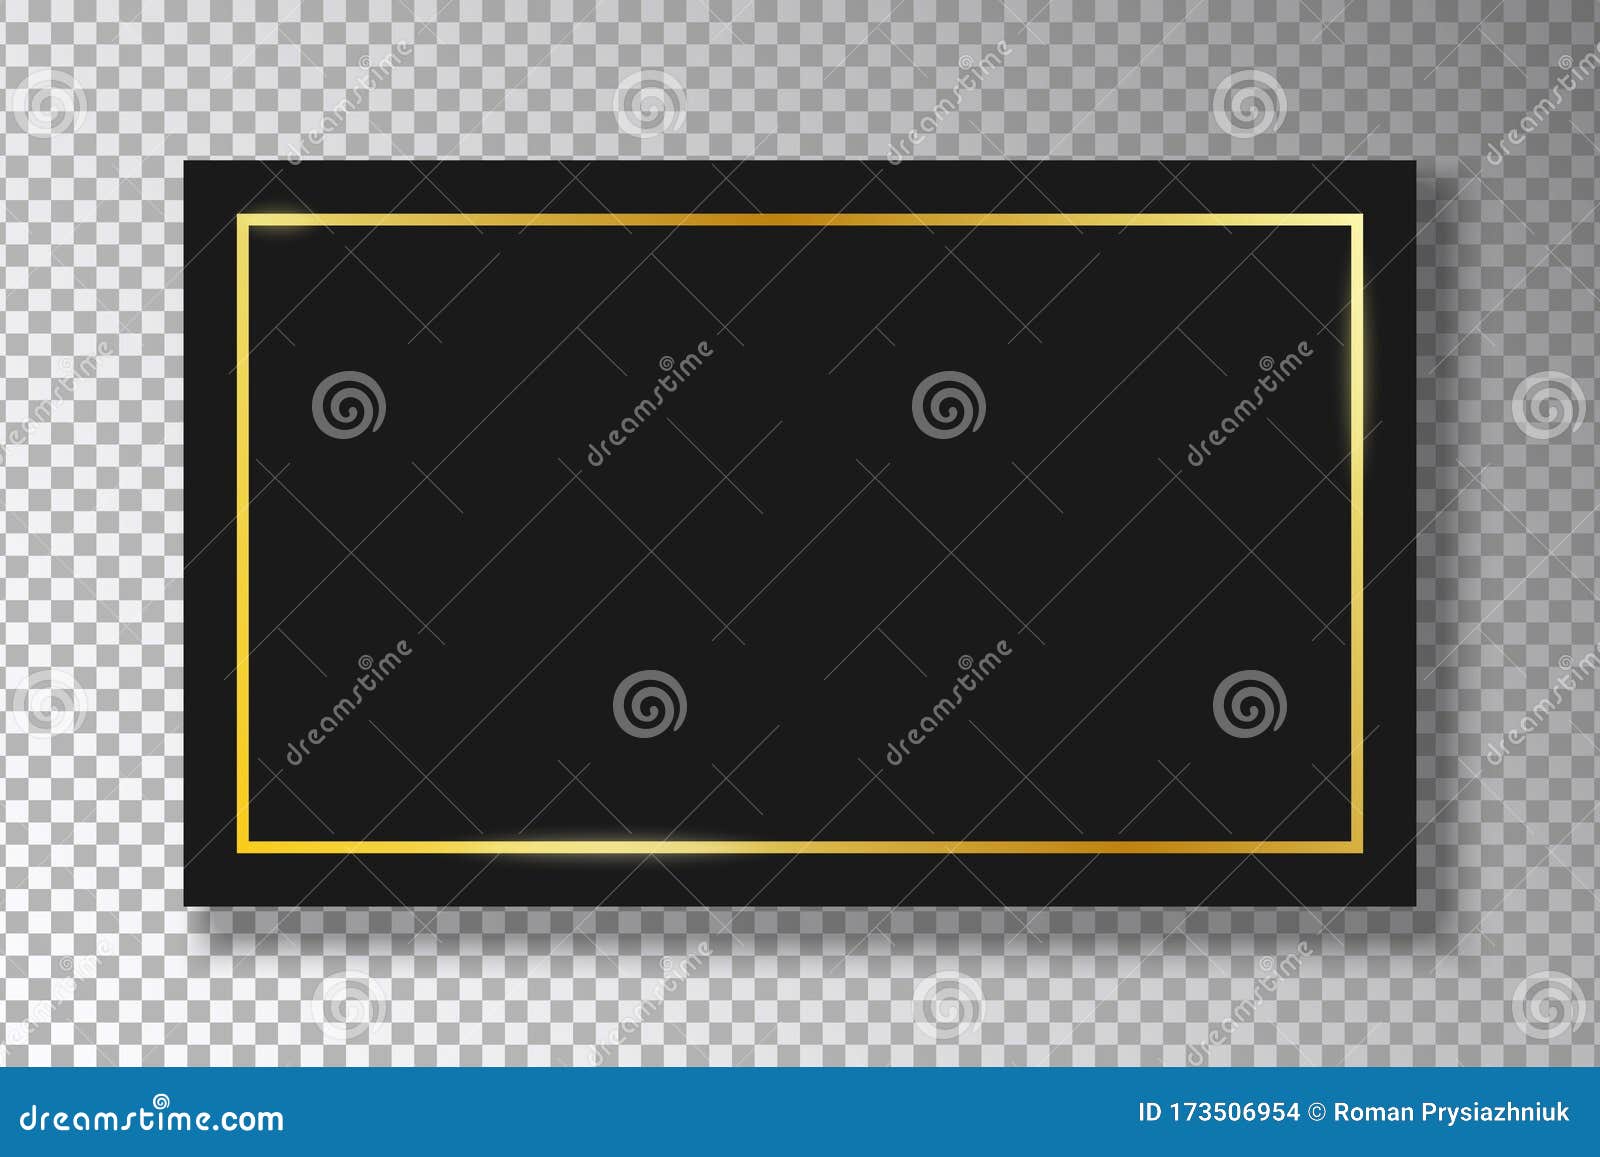 golden frame on black plate  on transparent background with shadow. gold border with glow shine on black rectangle. 